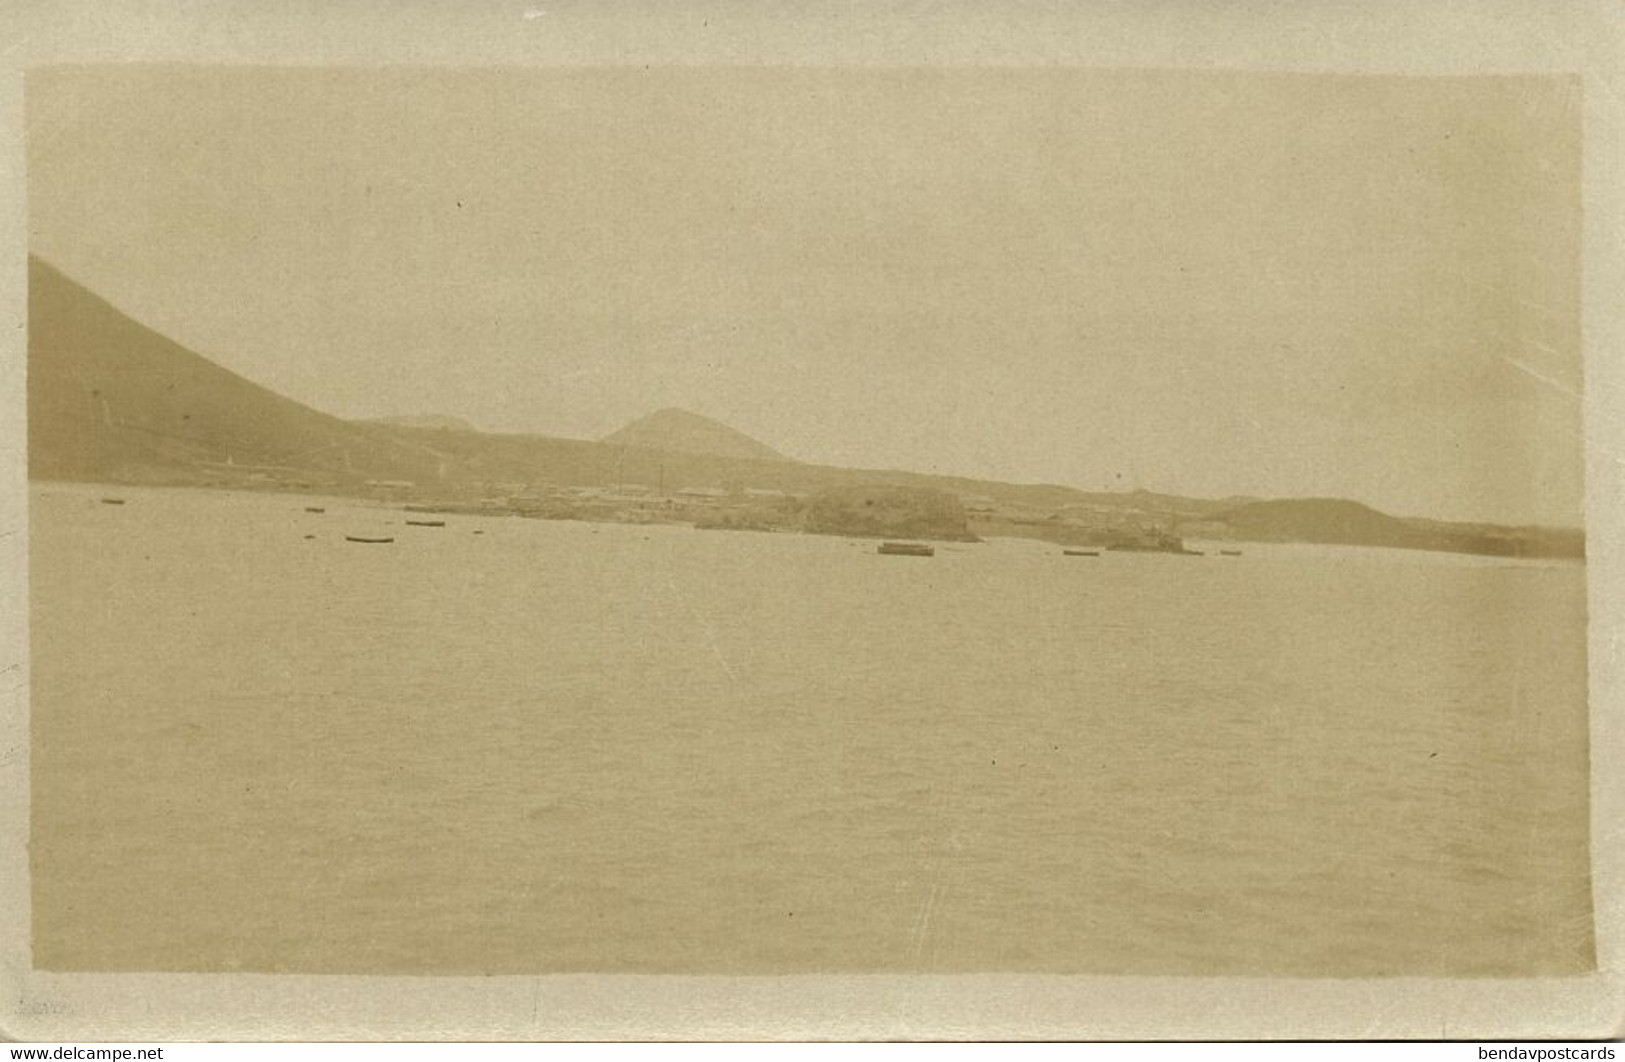 Ascension Island, Panorama From The Sea (1920s) RPPC Postcard - Ascension Island